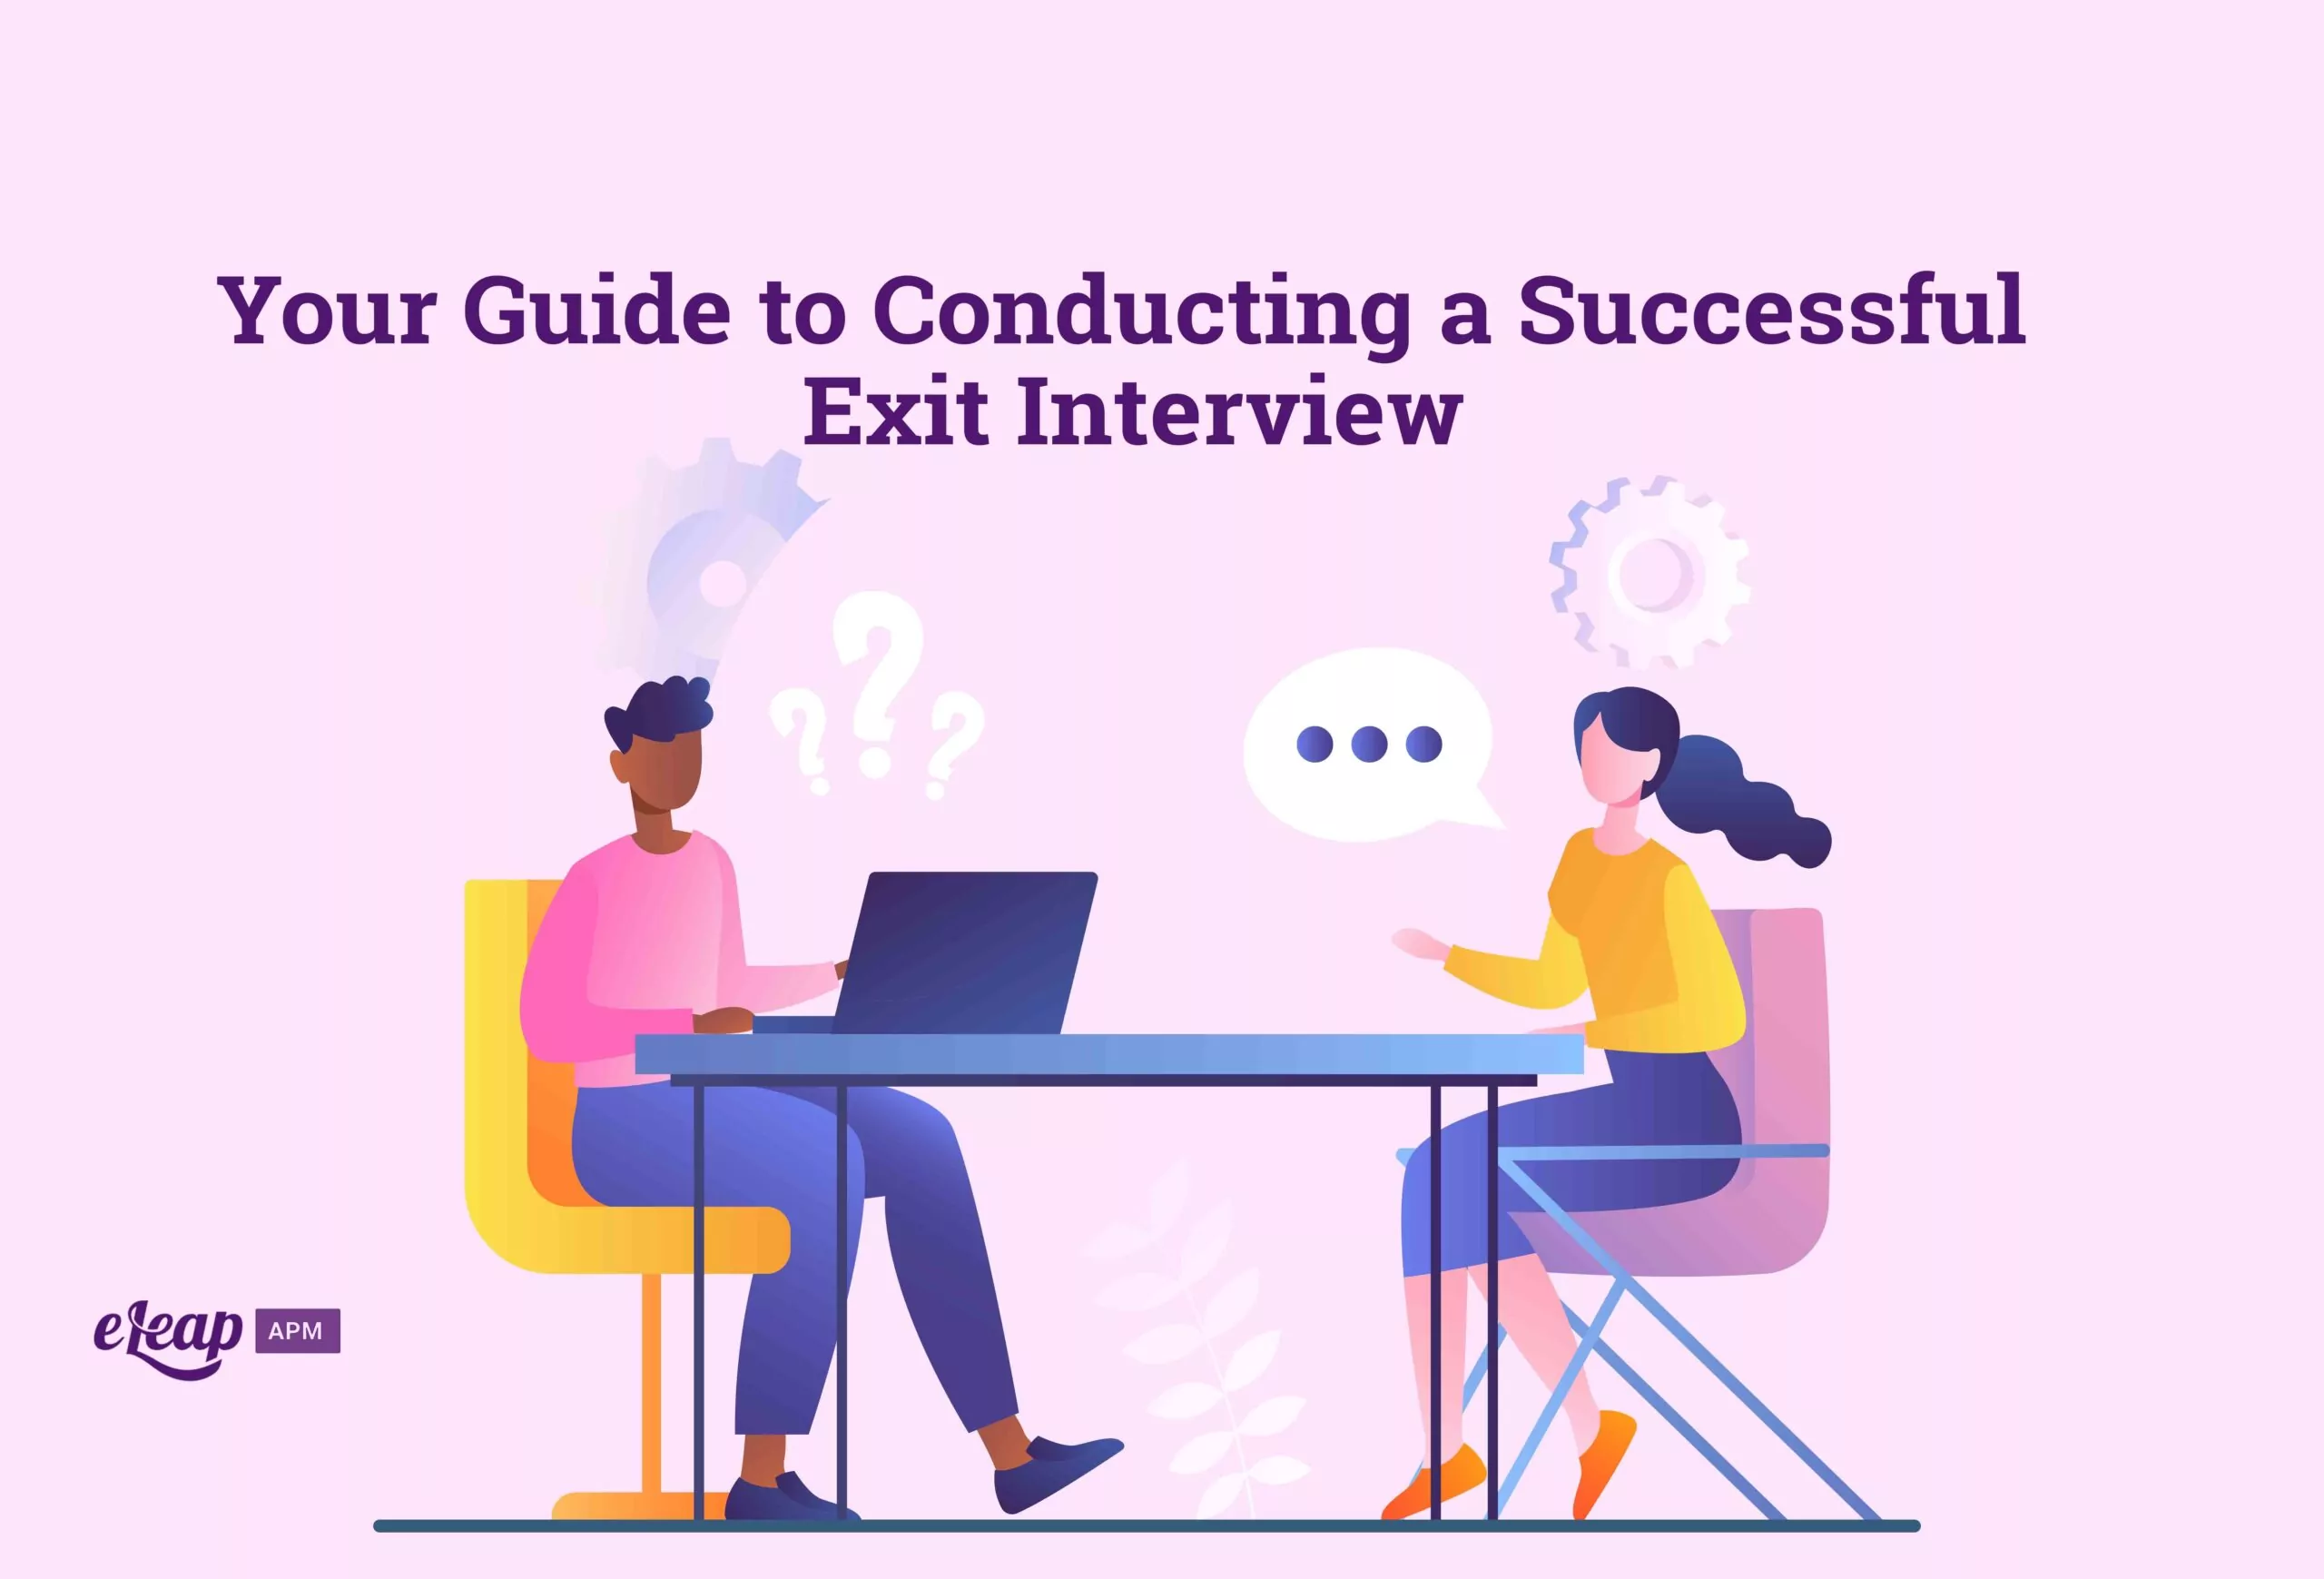 Your Guide to Conducting a Successful Exit Interview